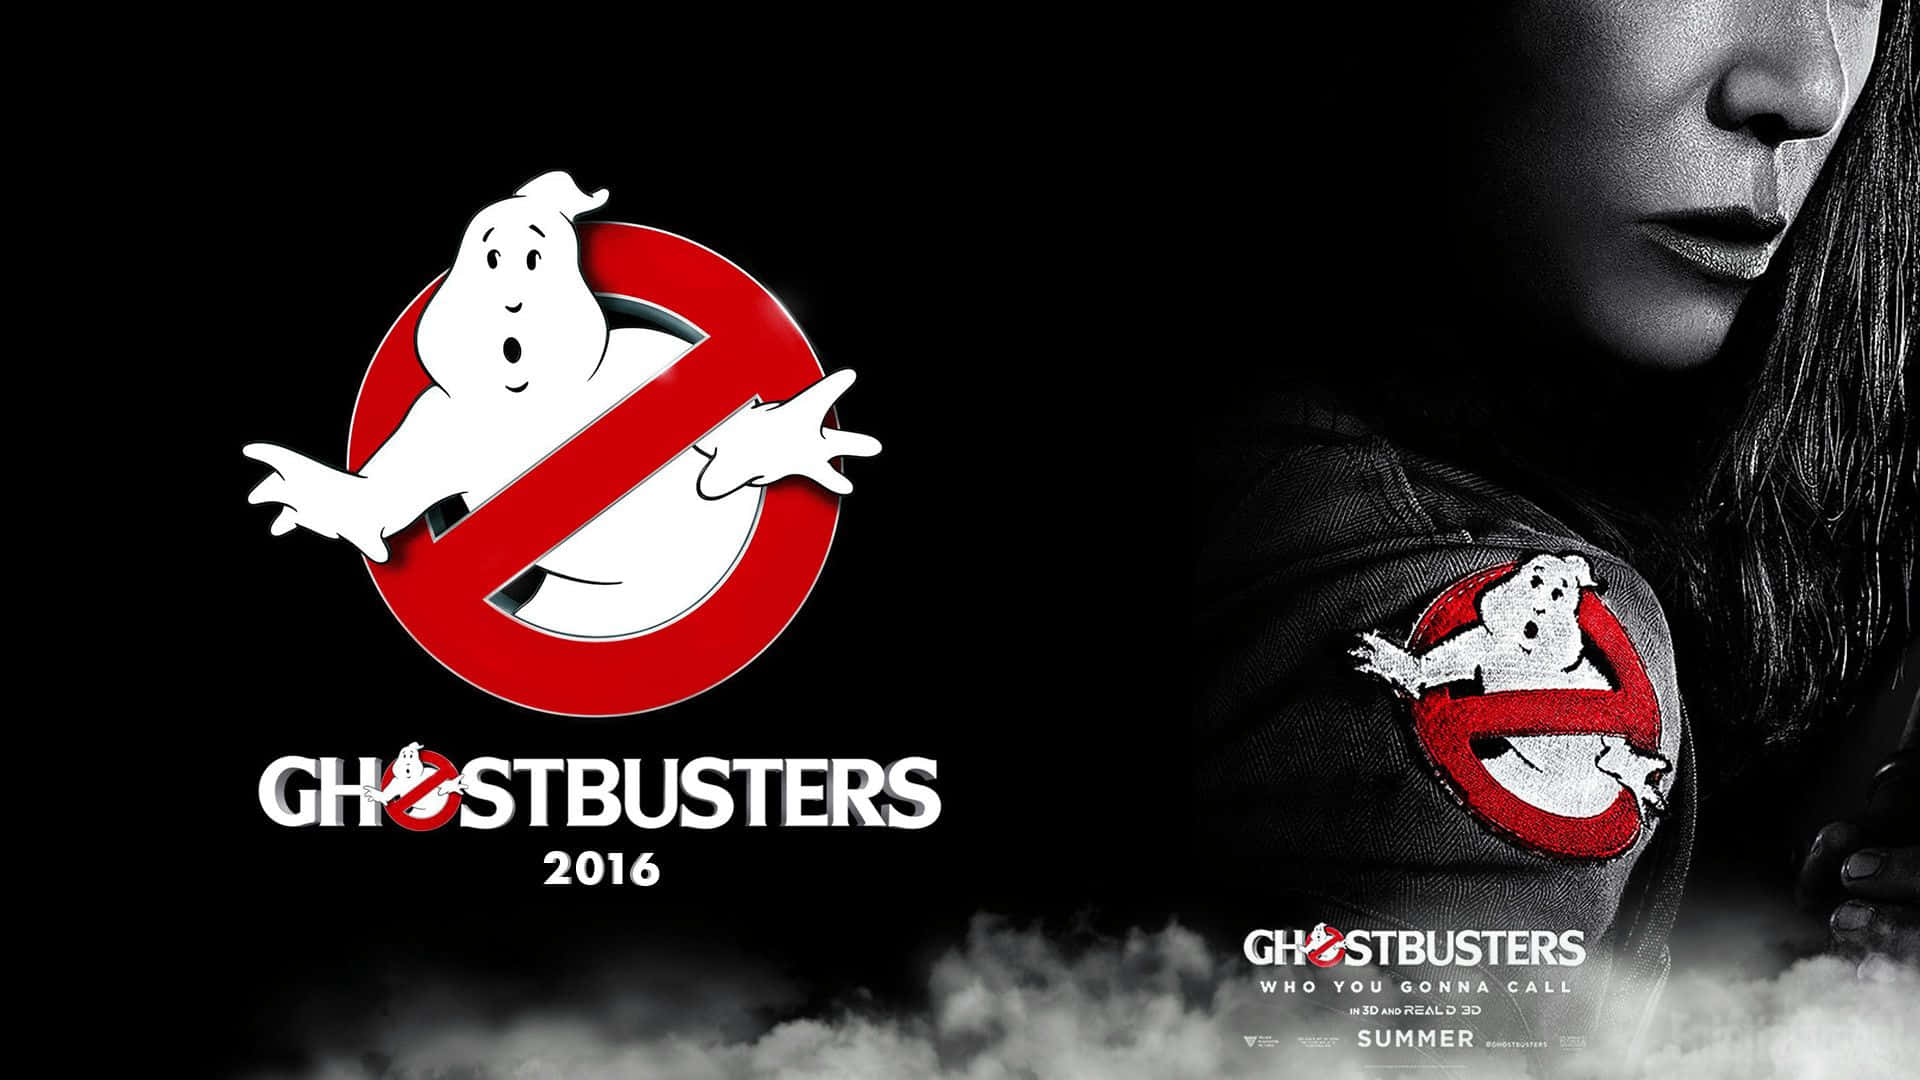 Grab your proton packs and ghost traps, it's time to go ghostbusting!